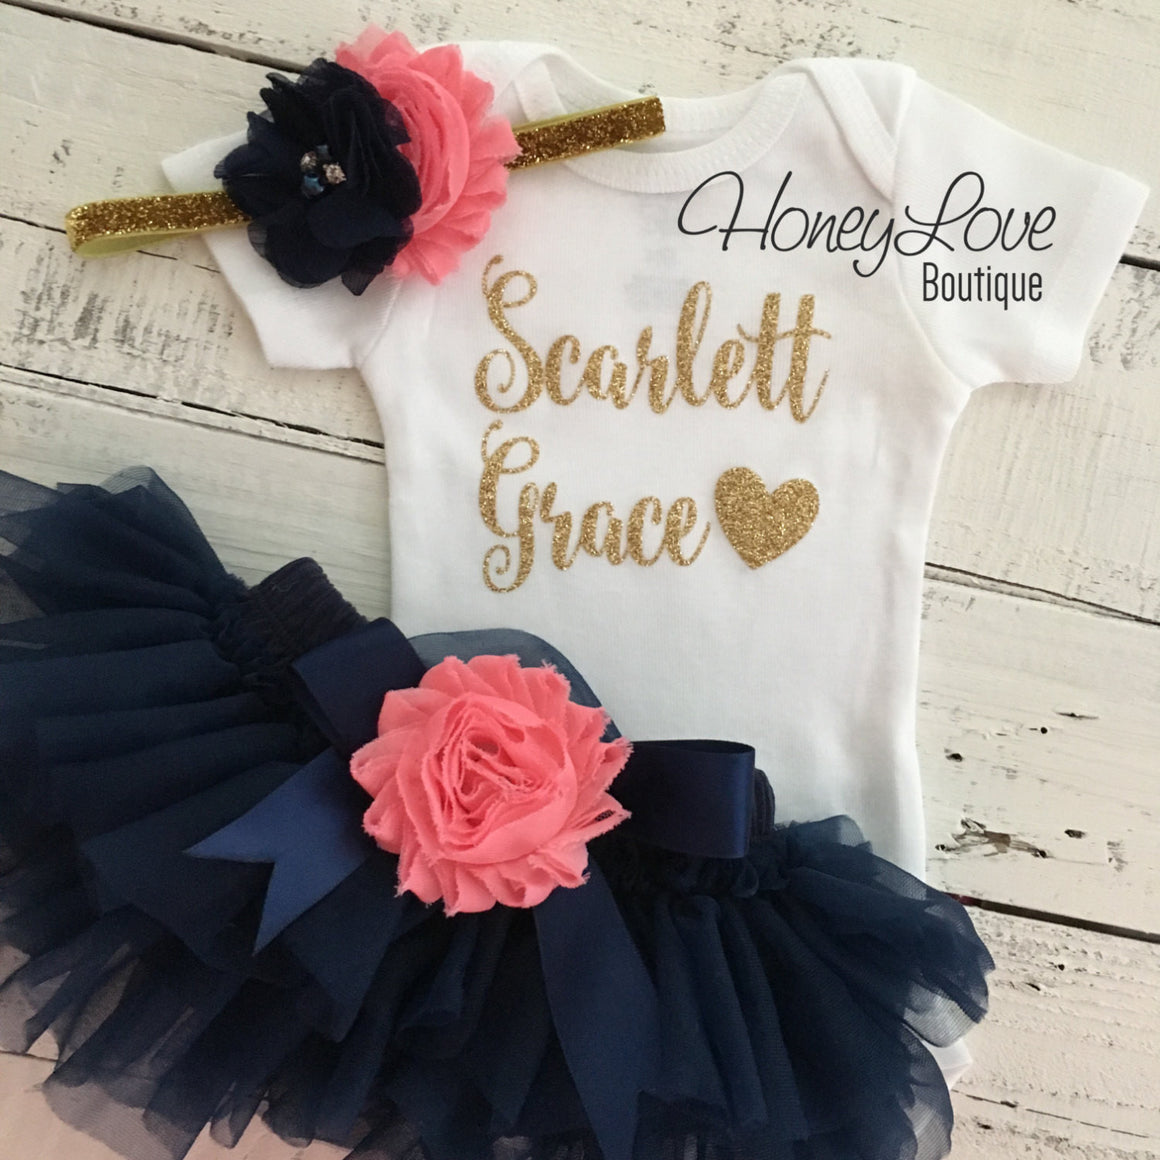 PERSONALIZED Name Outfit - Navy Blue and Gold Glitter - Coral pink shabby flower embellished tutu skirt bloomers - HoneyLoveBoutique